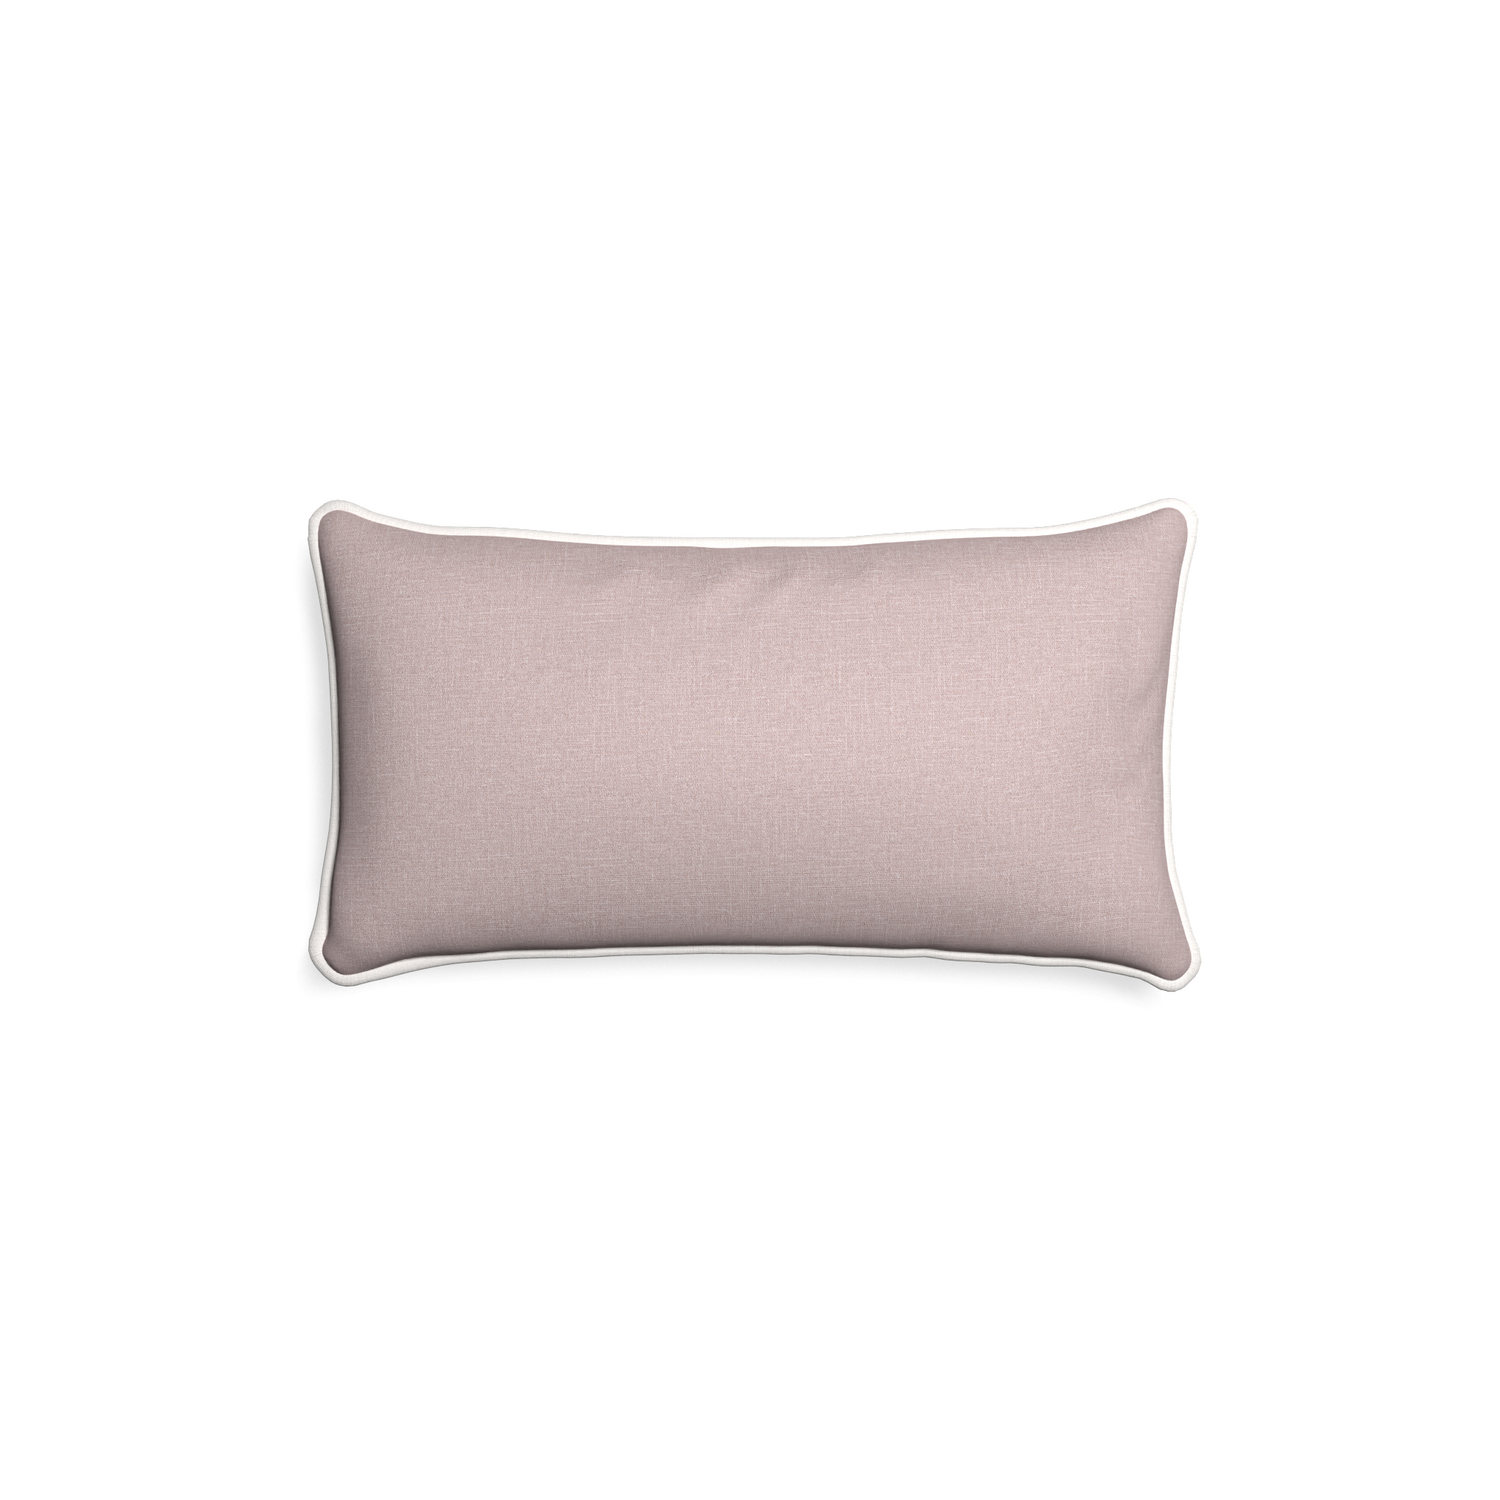 Petite-lumbar orchid custom mauve pinkpillow with snow piping on white background